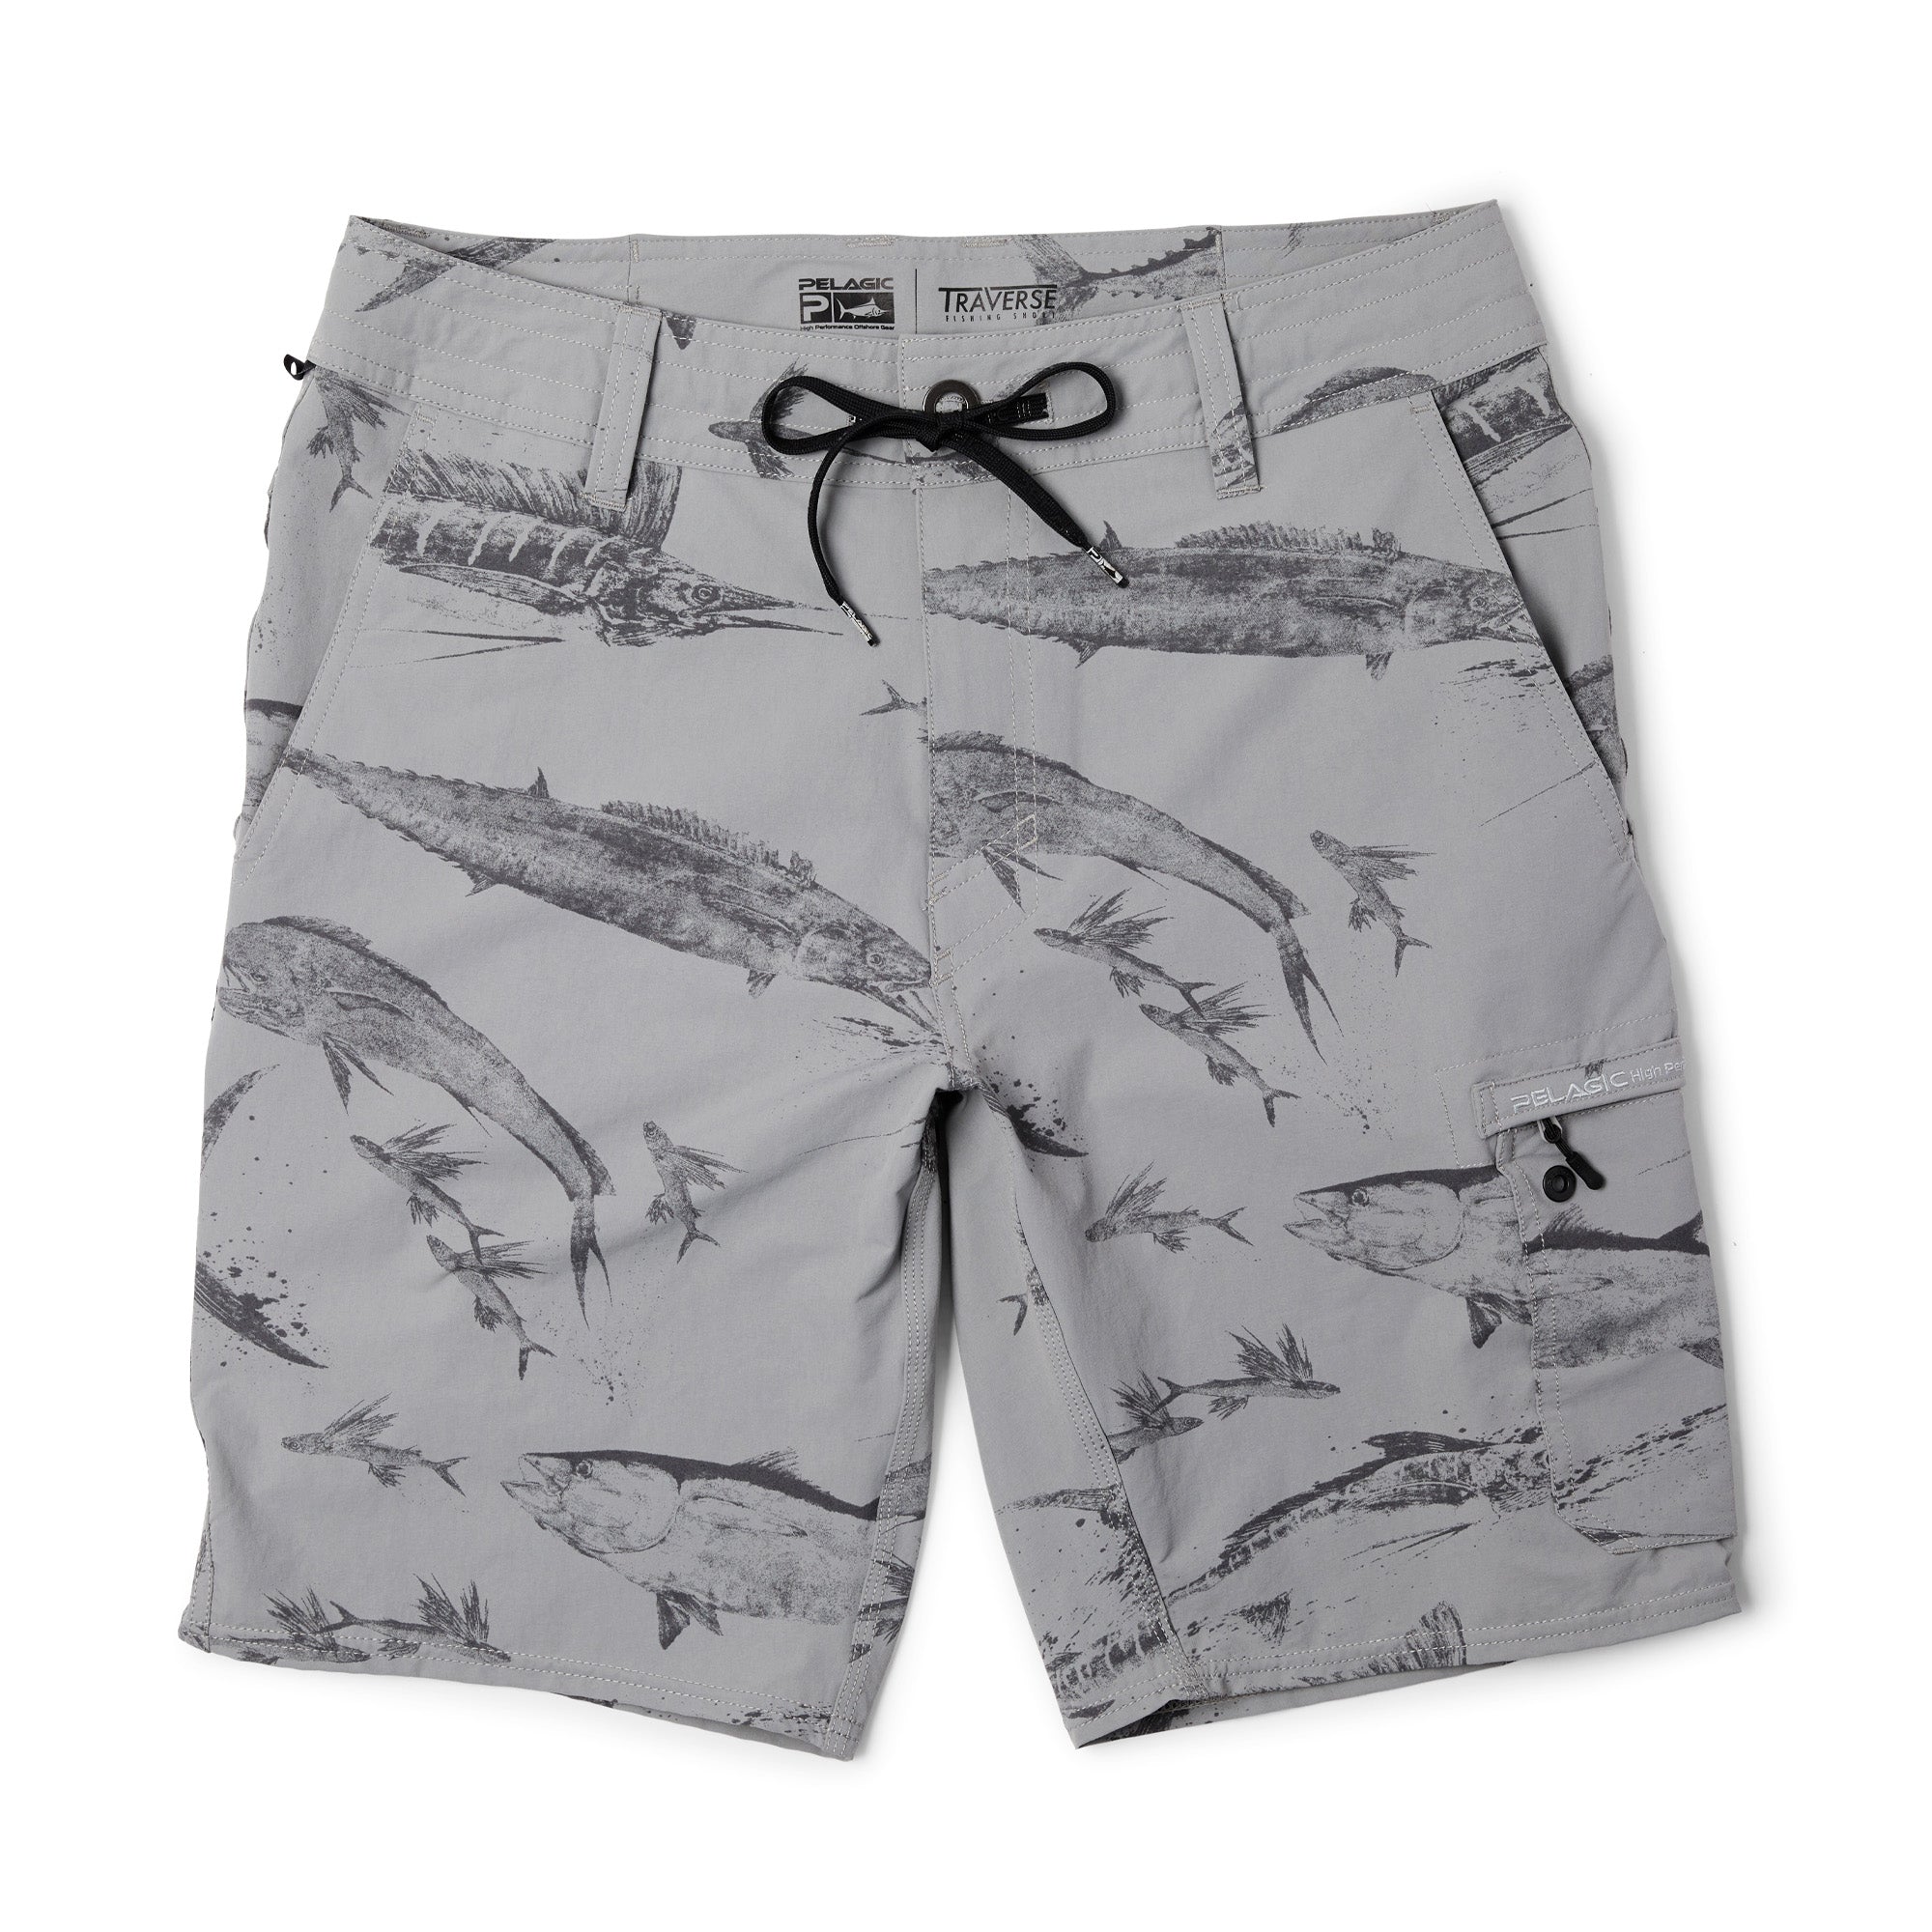 realtree men's performance hybrid fishing shorts for Sale,Up To OFF 70%